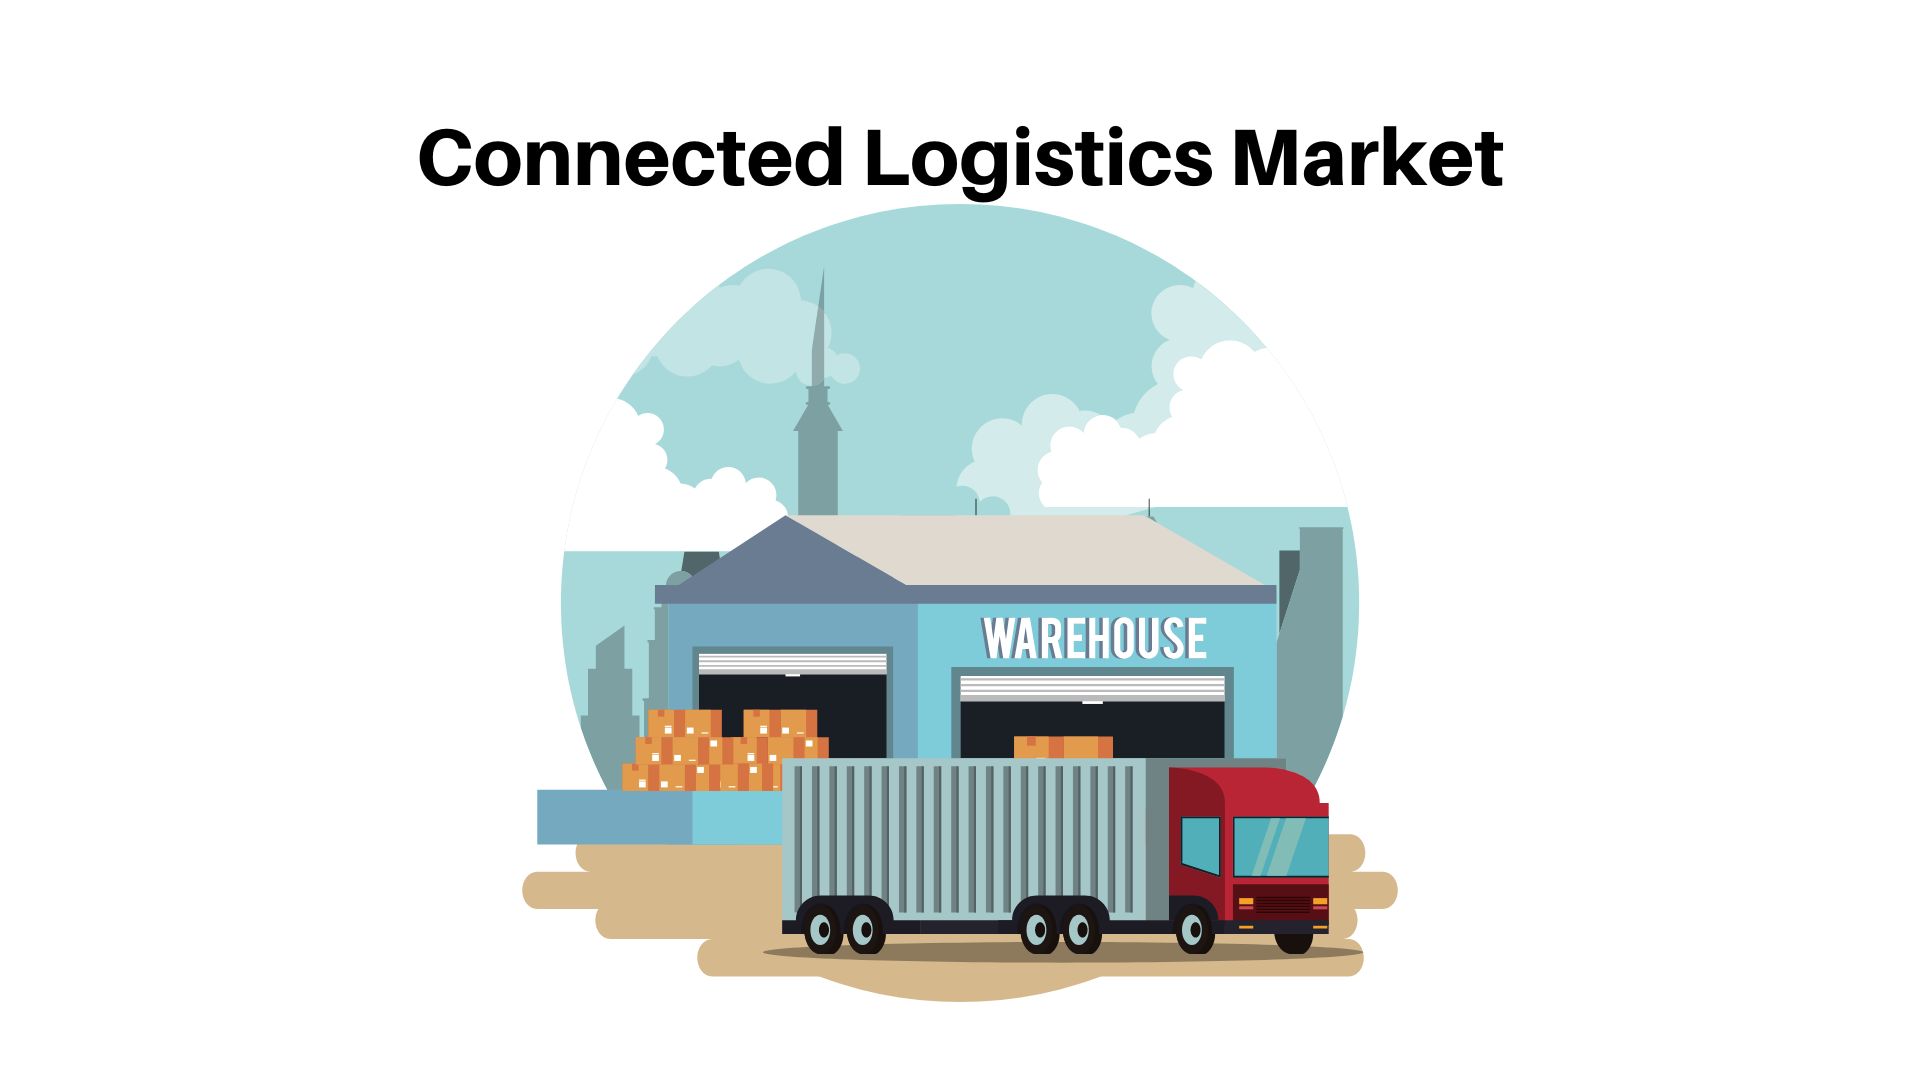 Connected Logistics Market Sales to Expand at 11.99% CAGR Through 2033